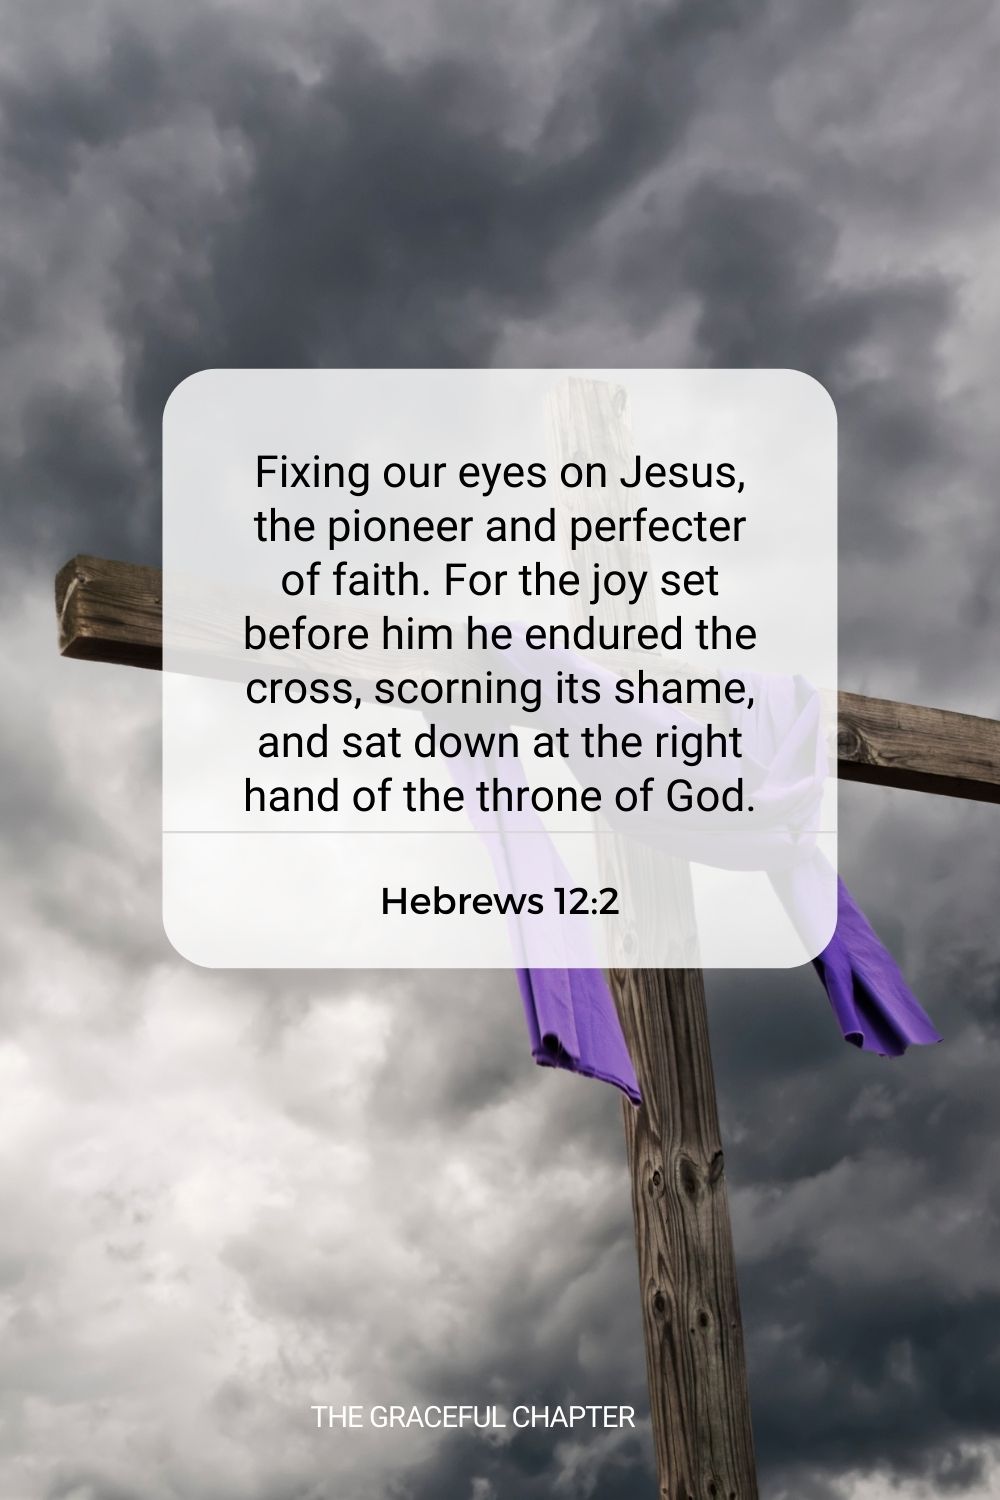 Fixing our eyes on Jesus, the pioneer and perfecter of faith. For the joy set before him he endured the cross, scorning its shame, and sat down at the right hand of the throne of God. Hebrews 12:2